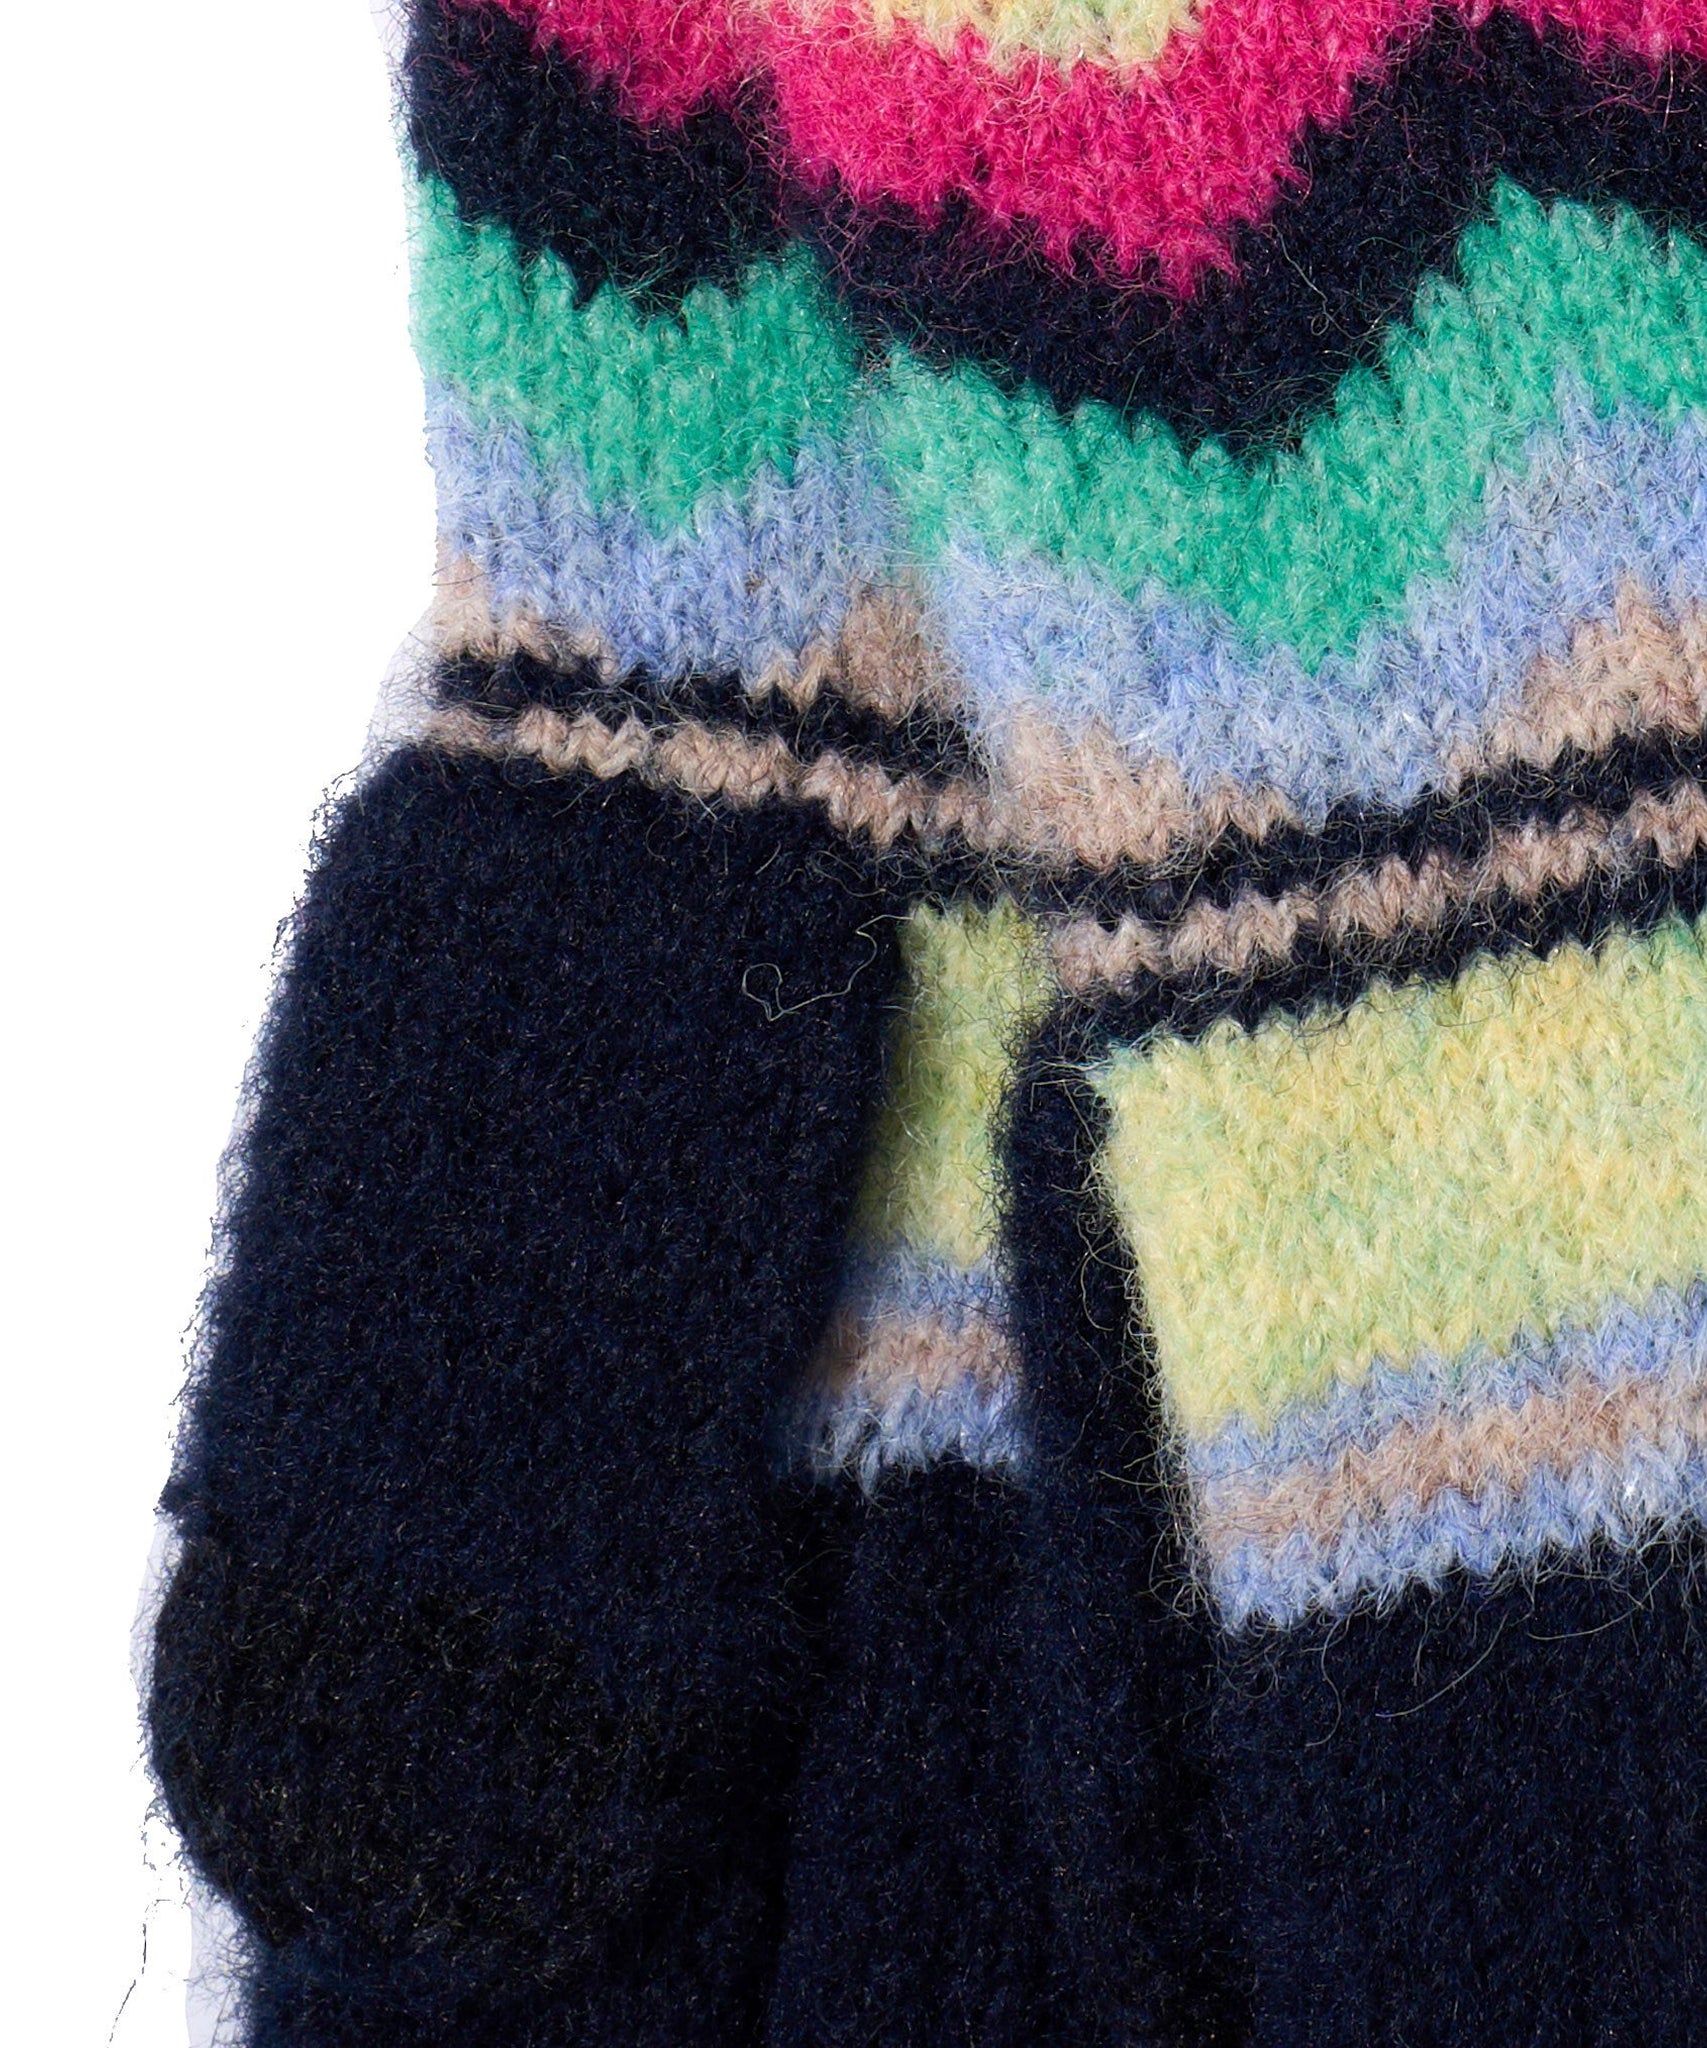 Ziggy Touch Glove in color Multi